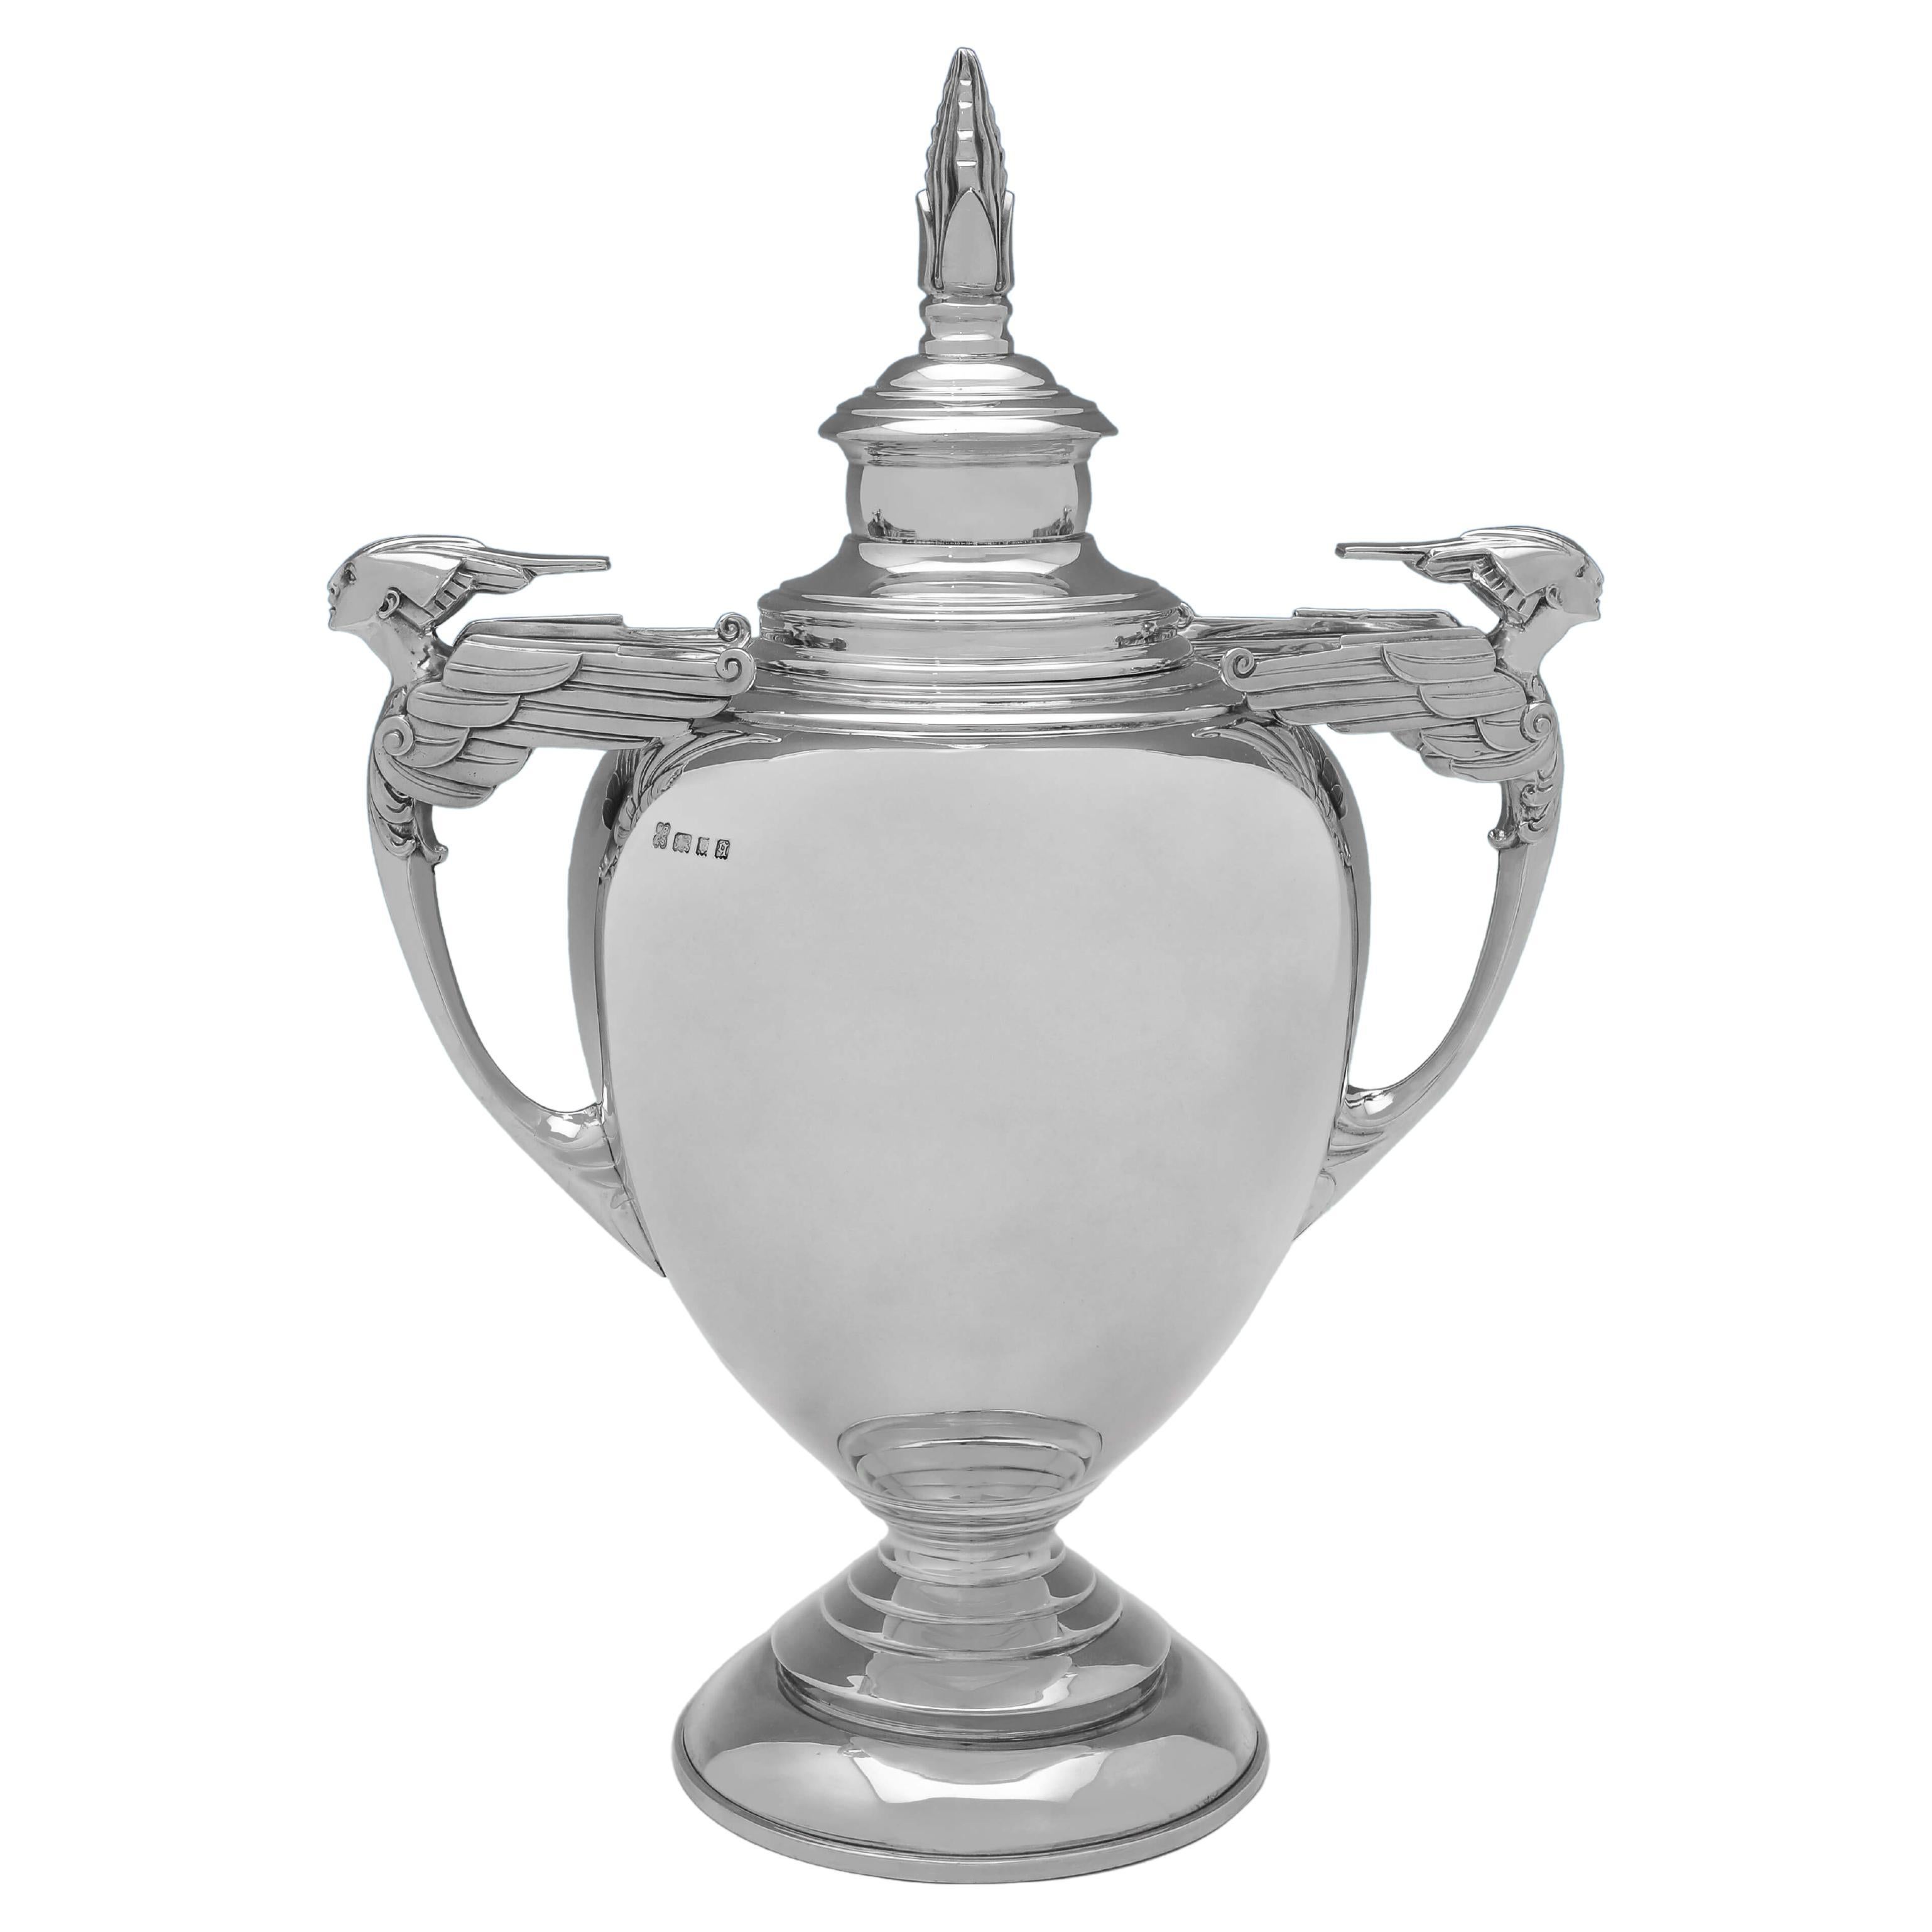 Amazing Art Deco Period Sterling Silver Trophy - Hallmarked in 1931